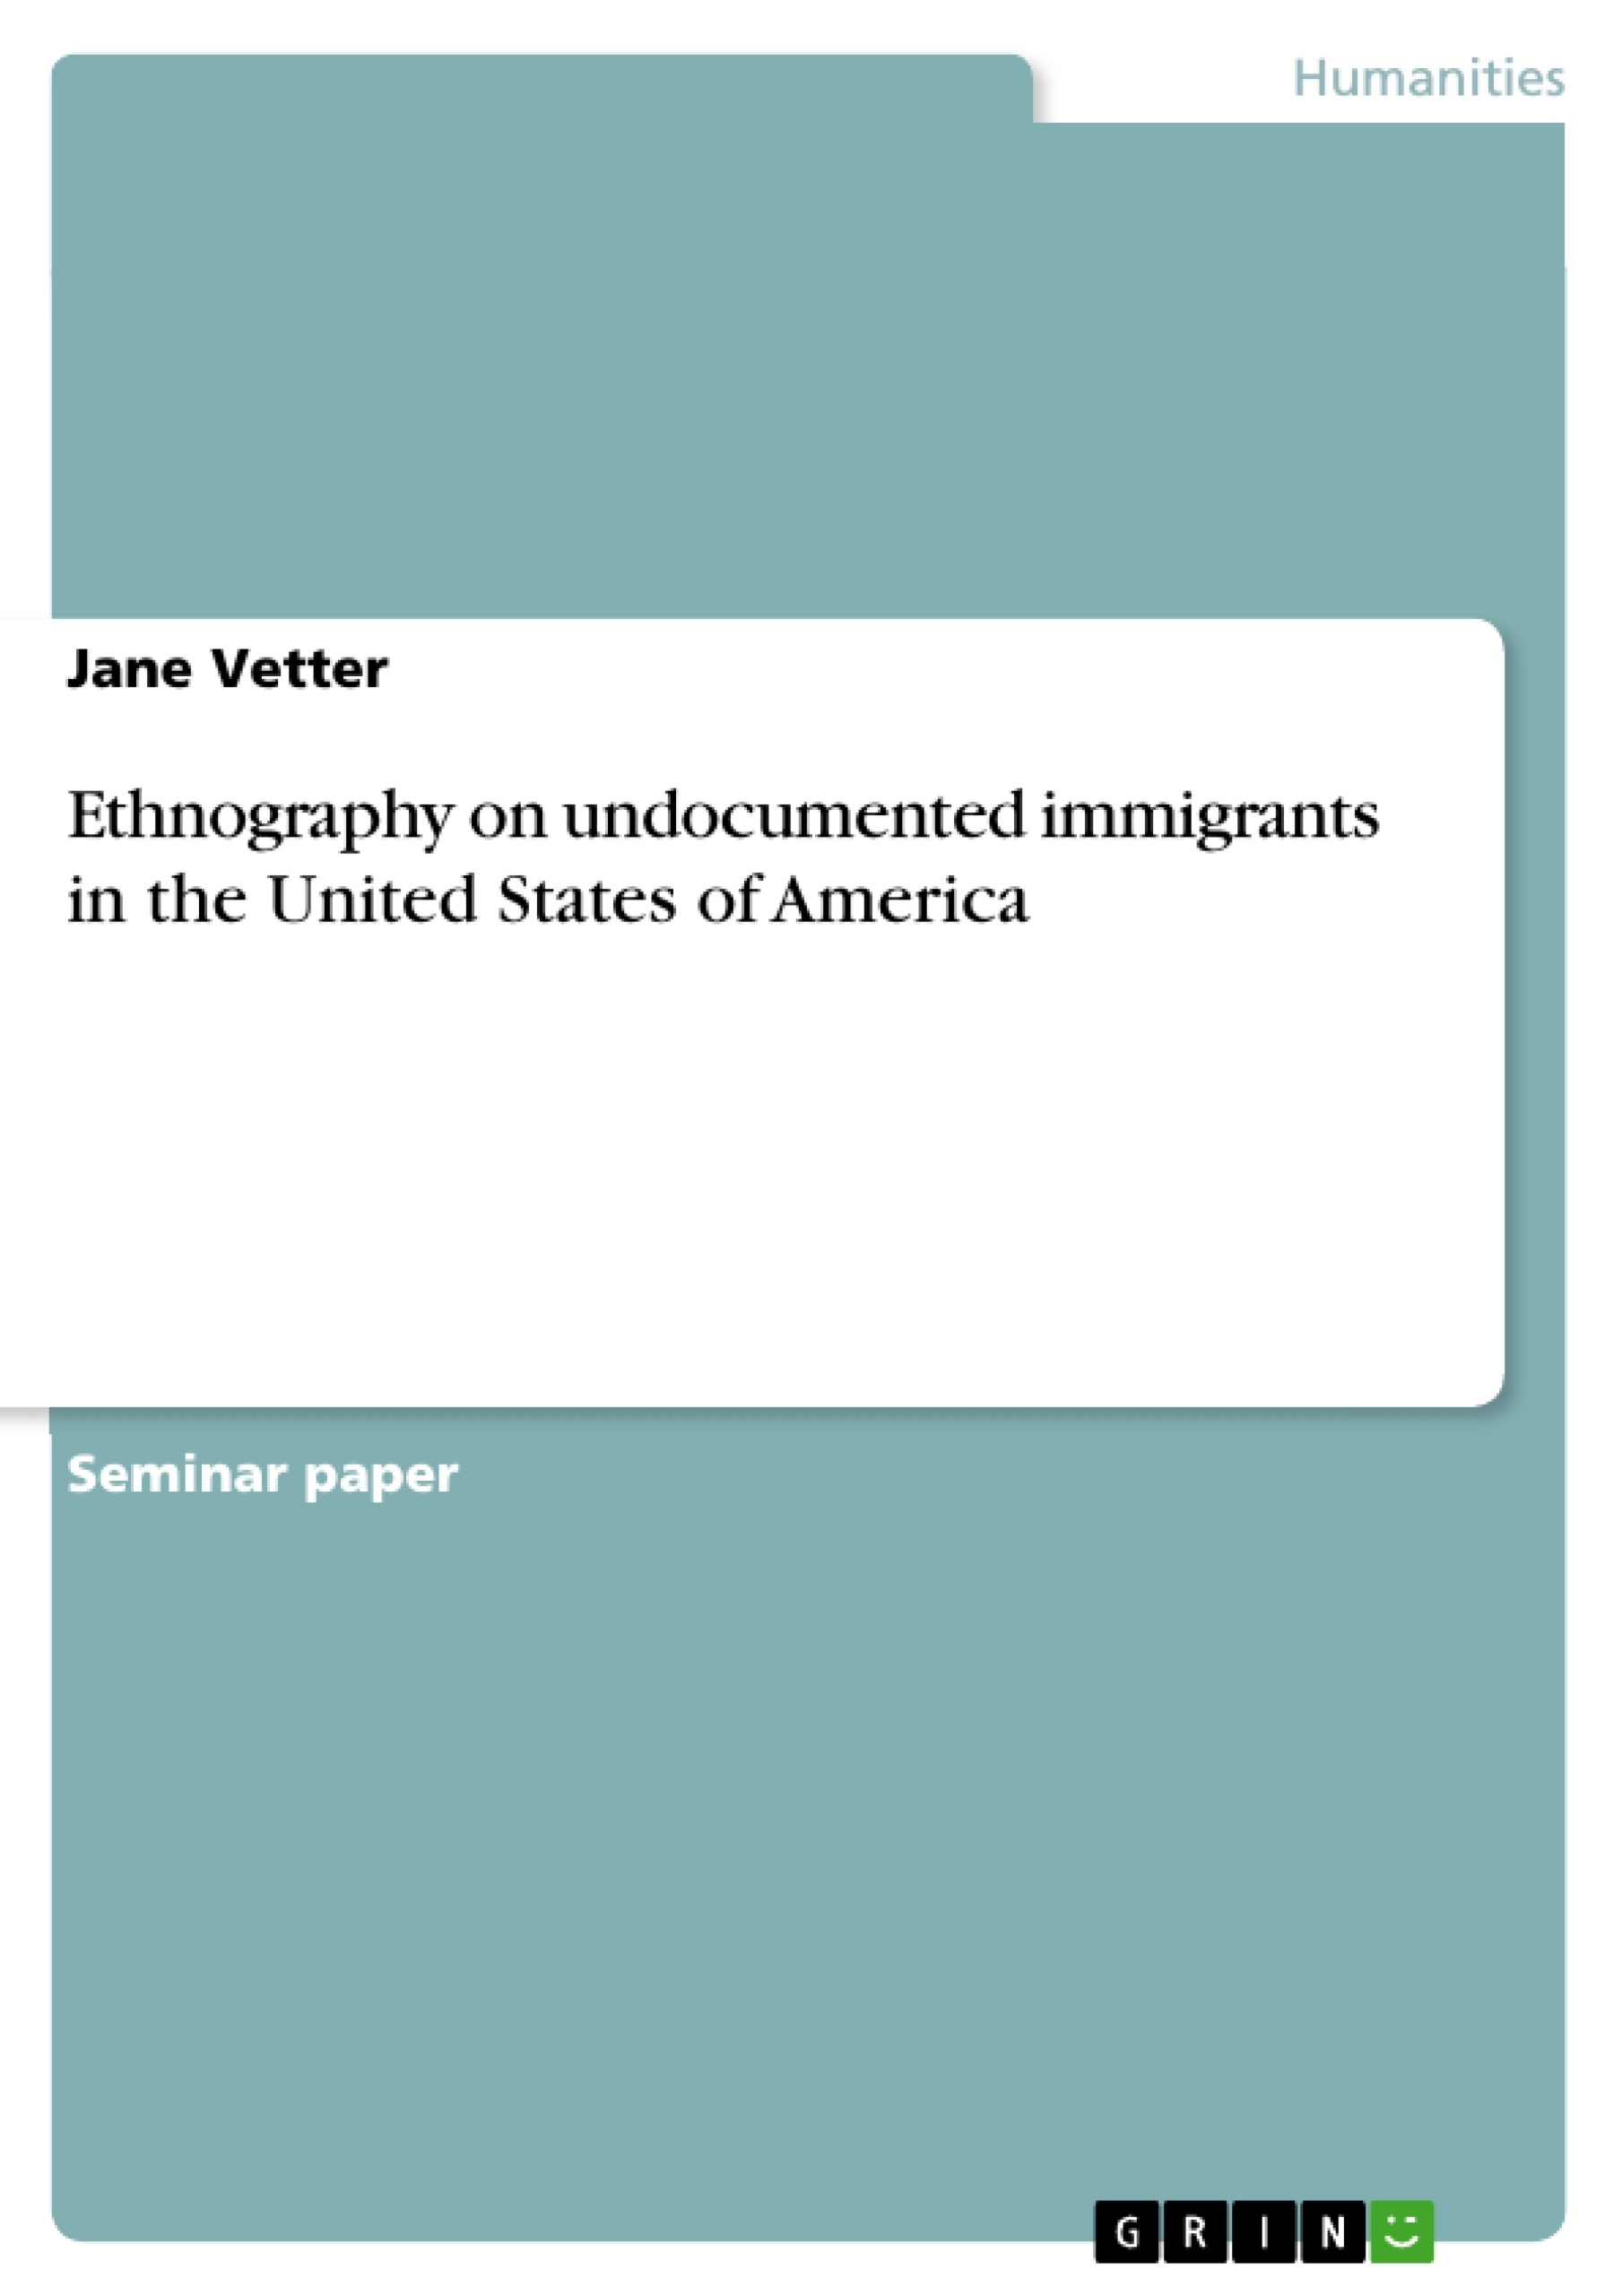 Title: Ethnography on undocumented immigrants in the United States of America